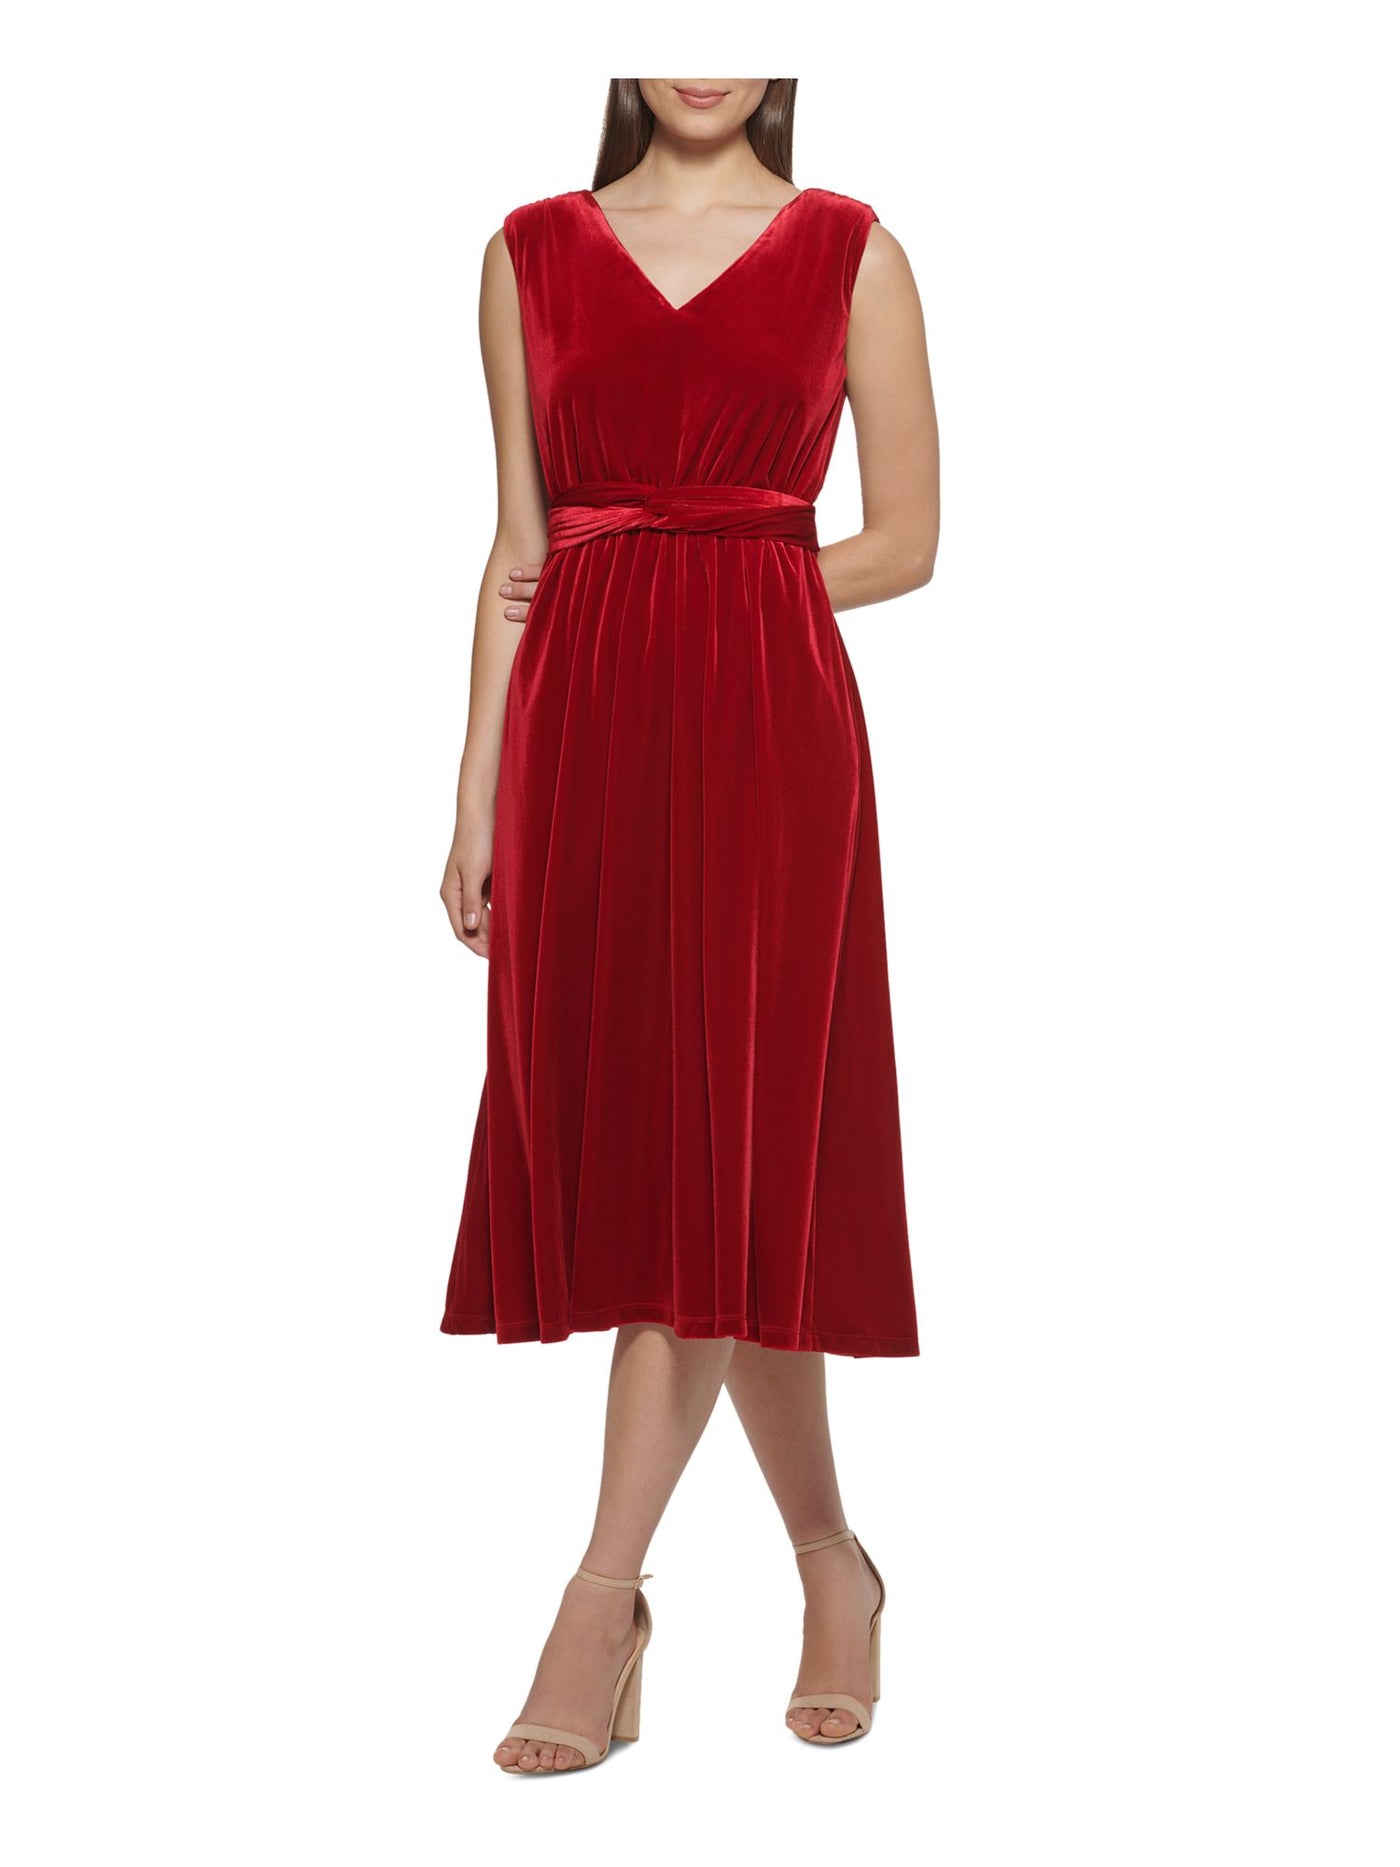 KENSIE Womens Red Pocketed Twist Front Sleeveless V Neck Midi Party Shift Dress L